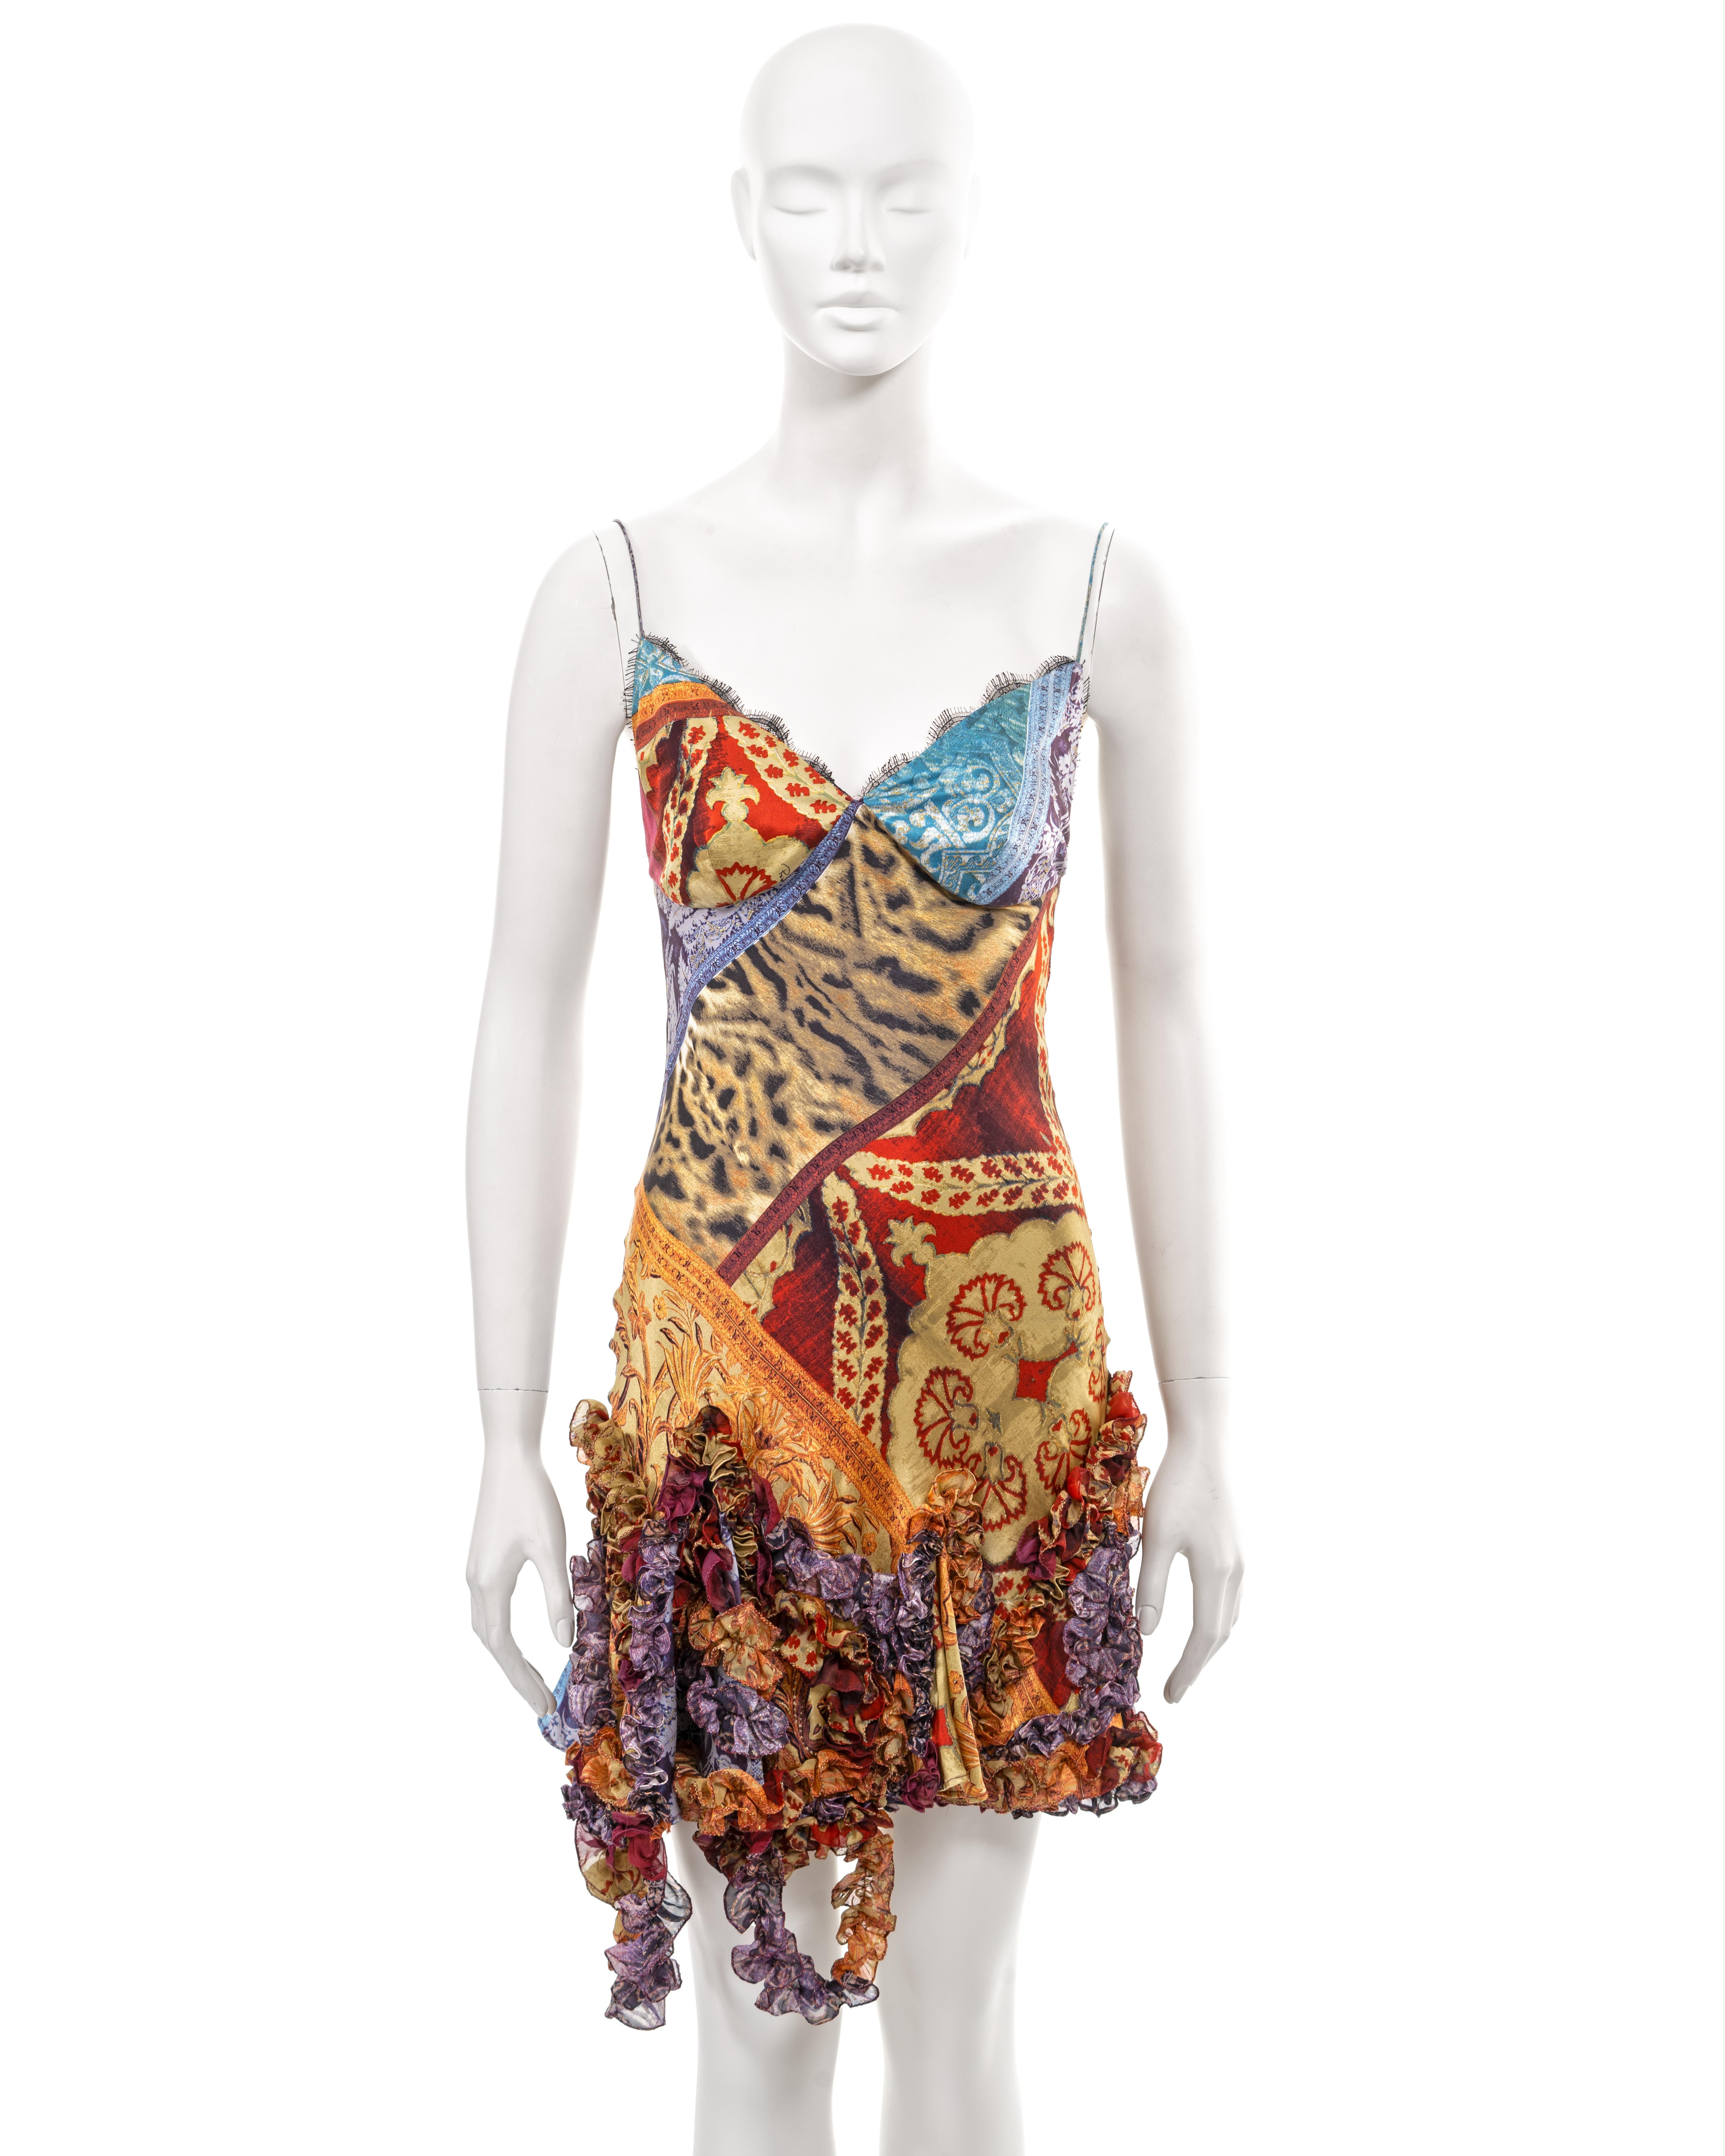 ▪ Roberto Cavalli evening slip dress
▪ Sold by One of a Kind Archive
▪ Fall-Winter 2004 
▪ Constructed from silk
▪ Patchwork motif of leopard and brocade prints in shades of orange, purple, red, blue and gold 
▪ Mini skirt with ruffled silk ribbon